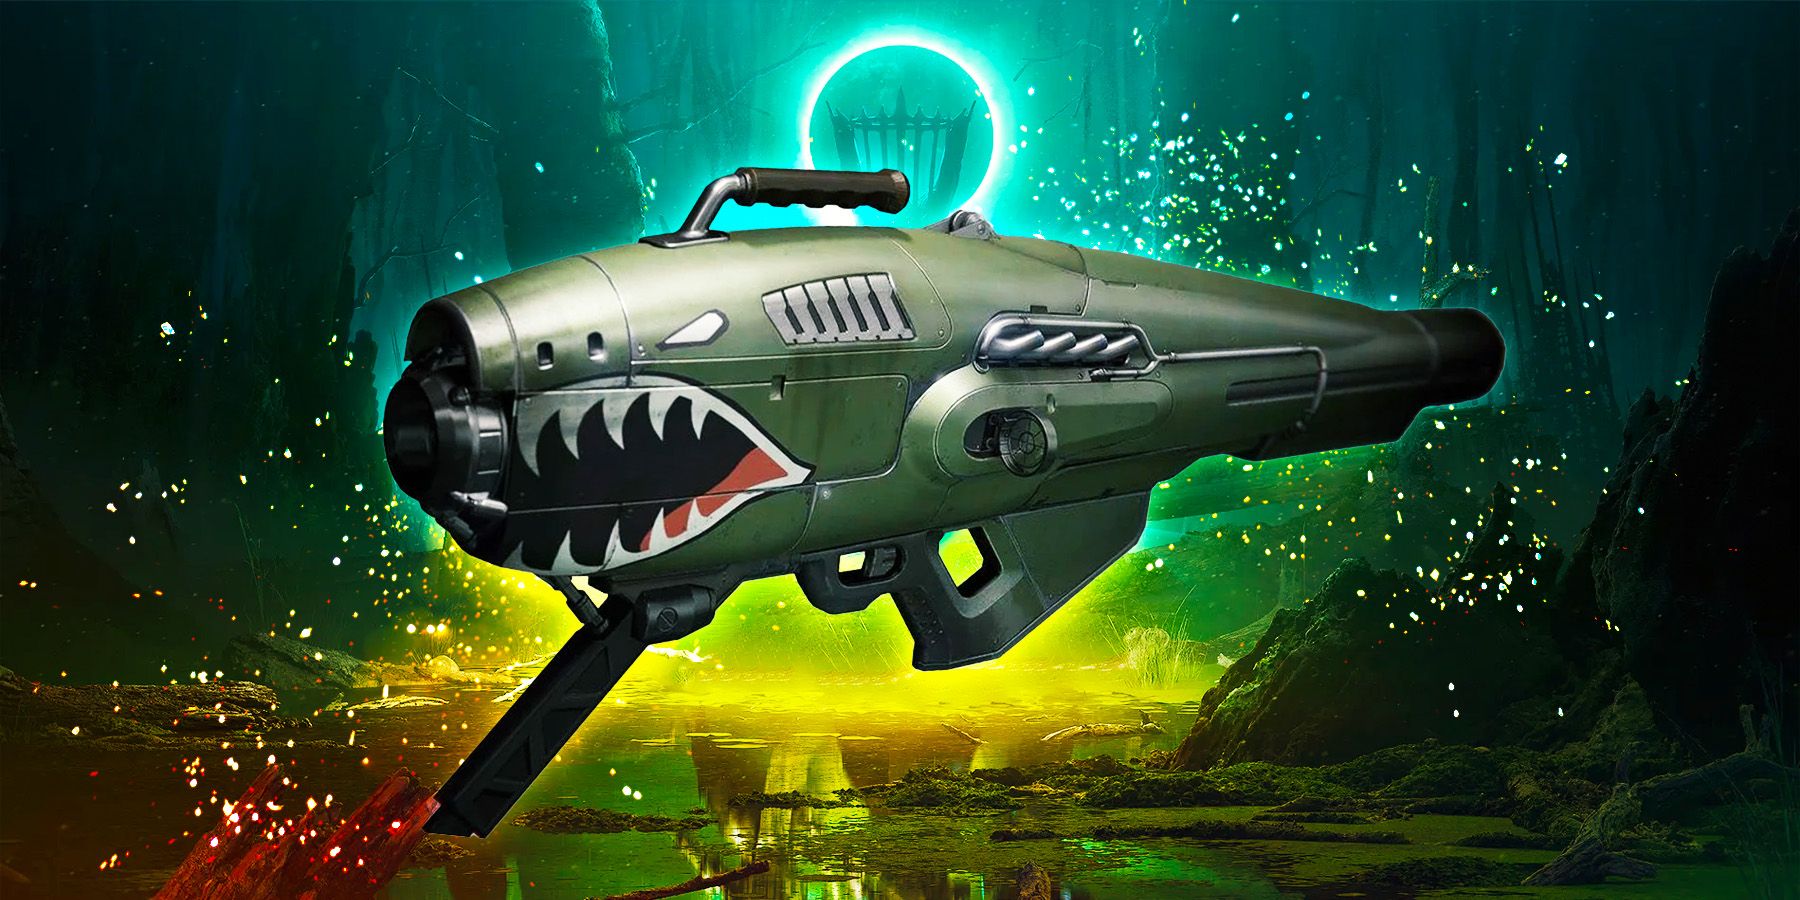 The Dragon’s Breath Exotic Rocket Launcher from Destiny 2 superimposed over a key art for The Witch Queen expansion.